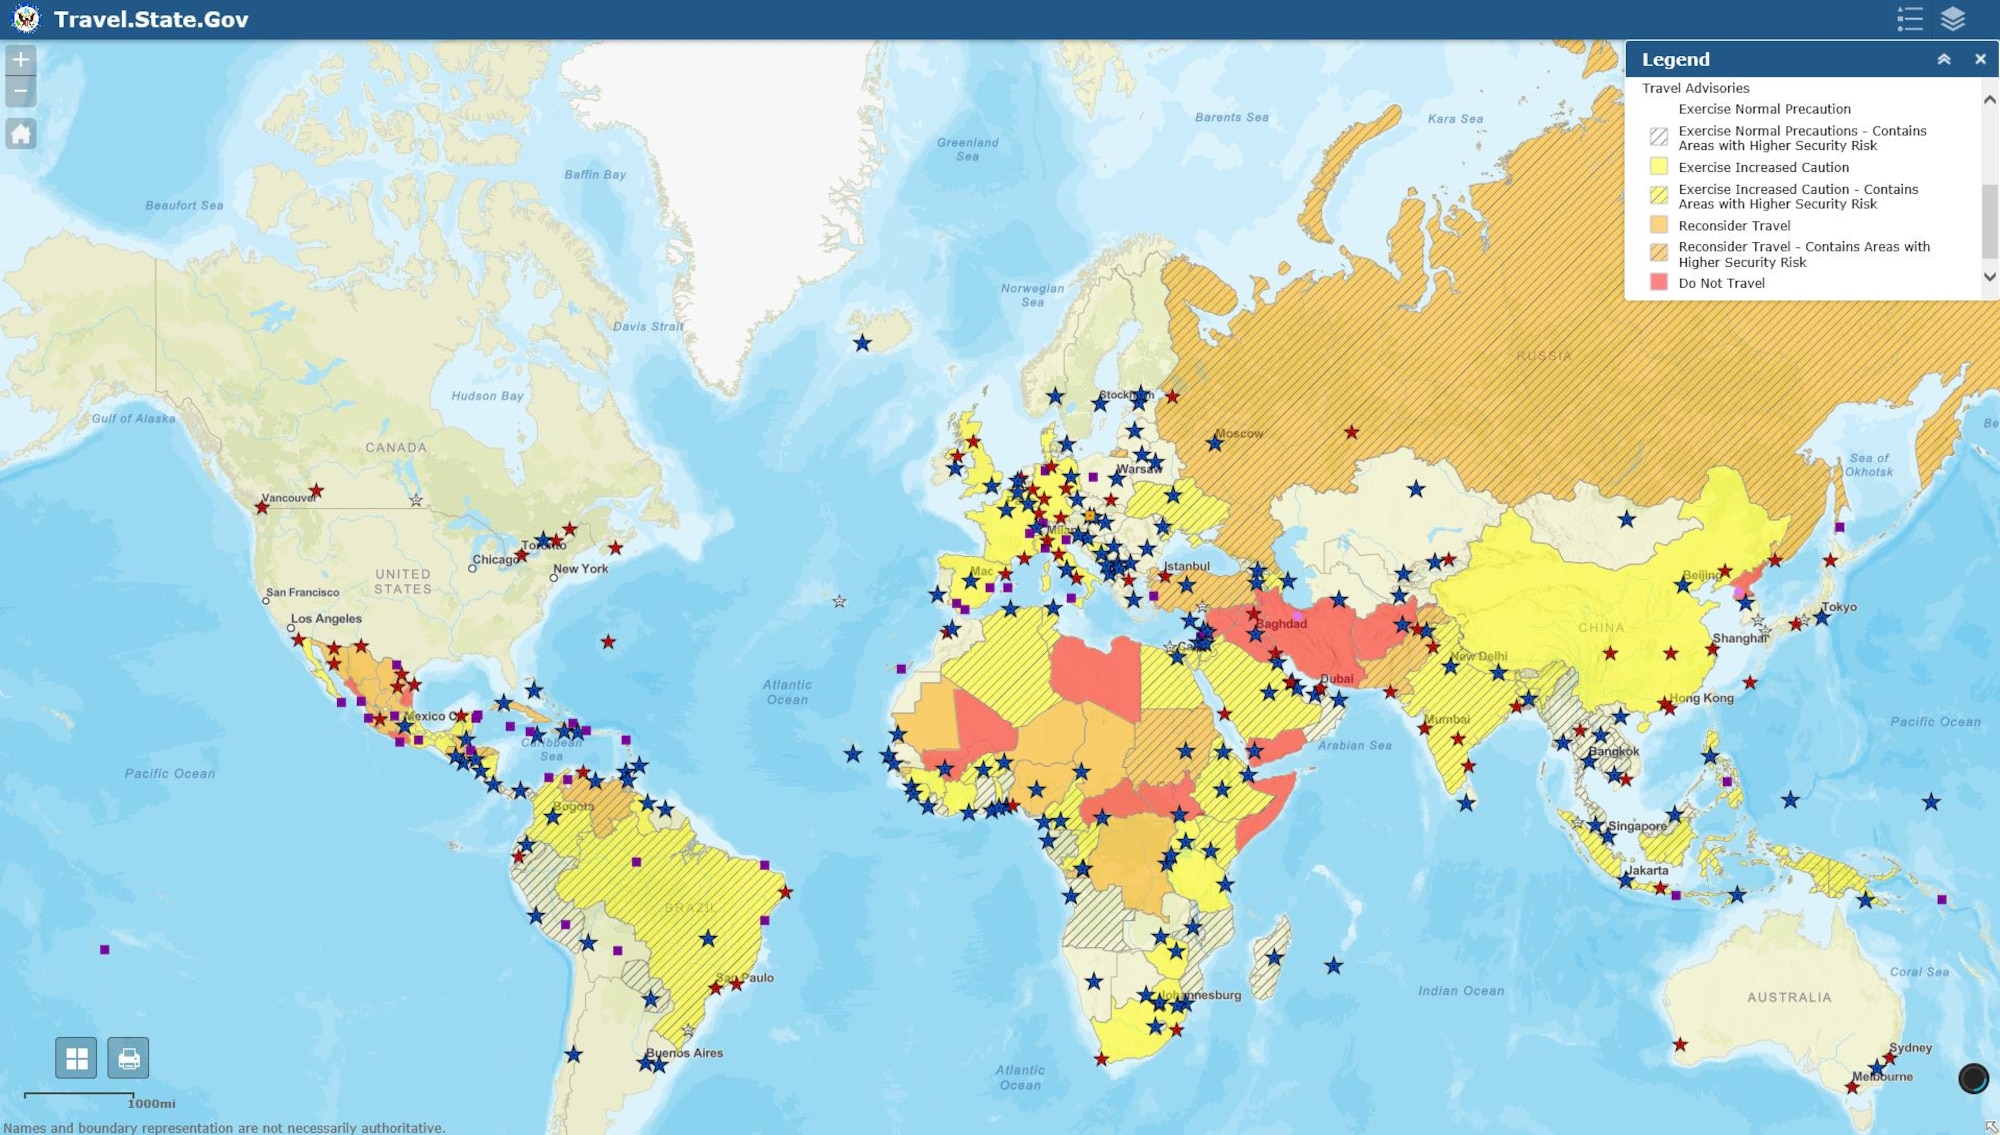 A color-coded map, found on travelmaps.state.gov, indicates the threat levels found in each country. The blue stars represent U.S. embassies and the red stars represent Consulate General. State Department travel advisories describe risks found within each country and provide clear actions U.S. citizens can take to ensure their own safety.